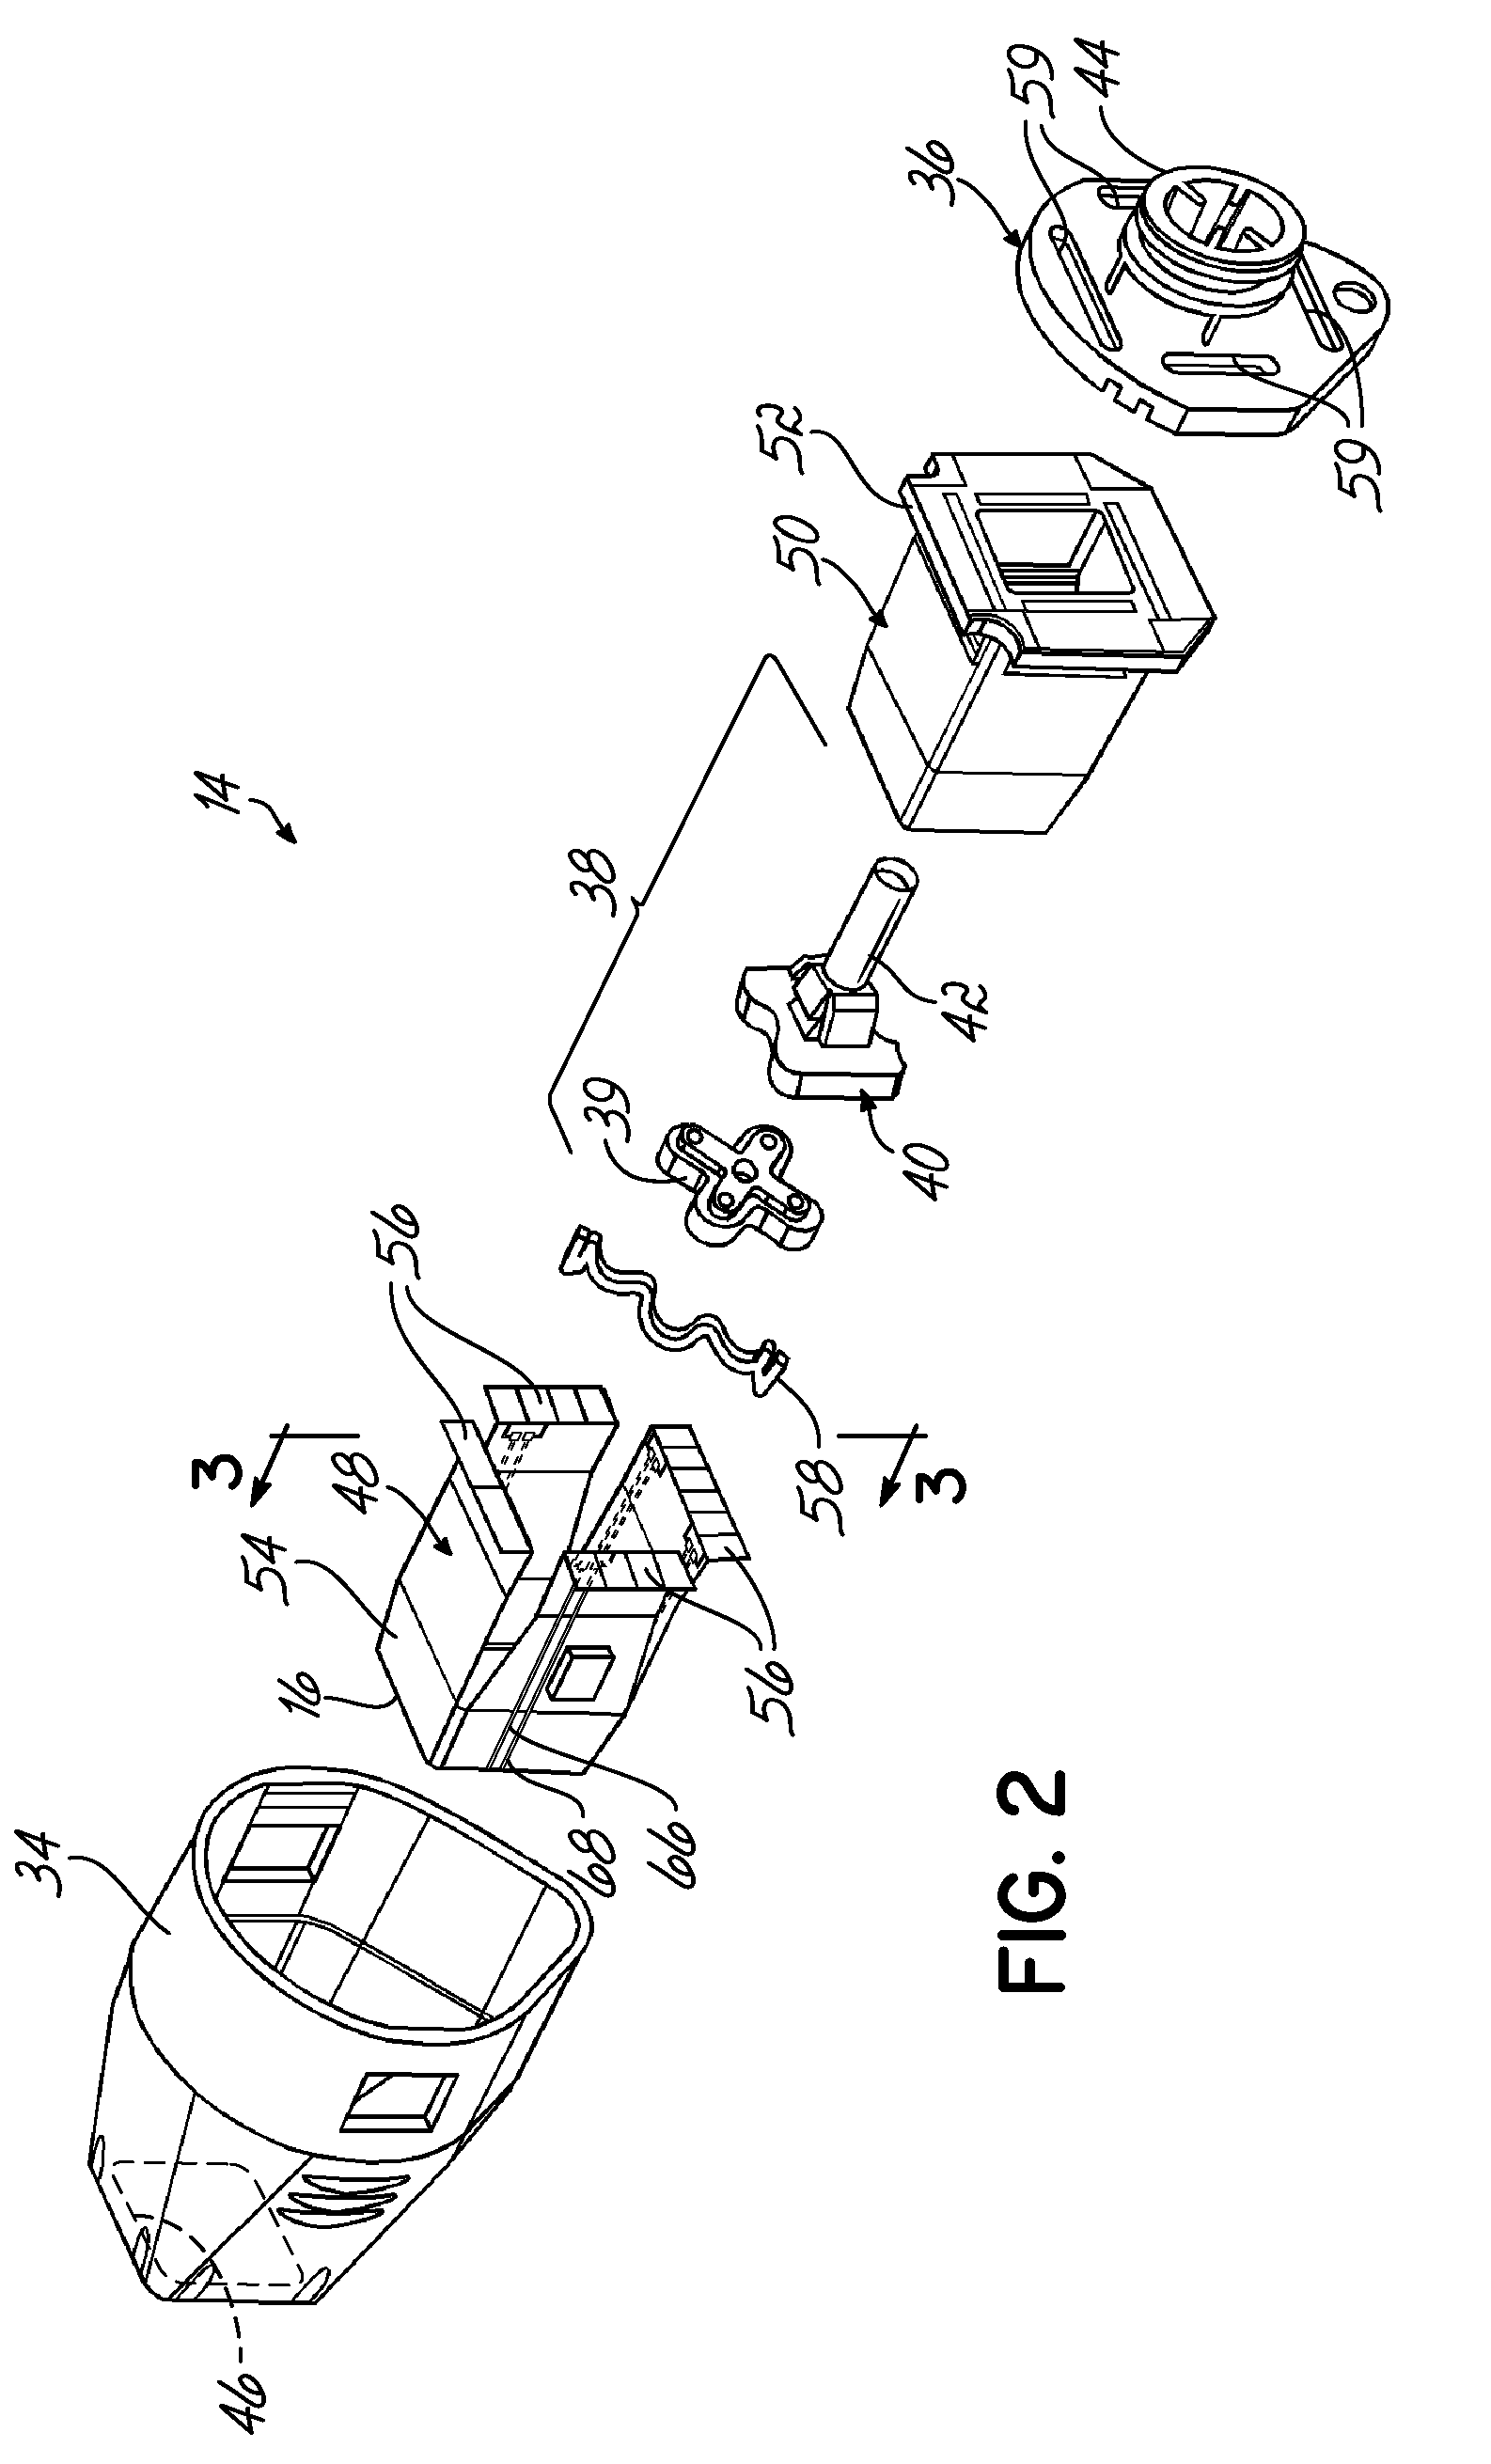 Temperature sensing apparatus and methods for treatment devices used to deliver high frequency energy to tissue